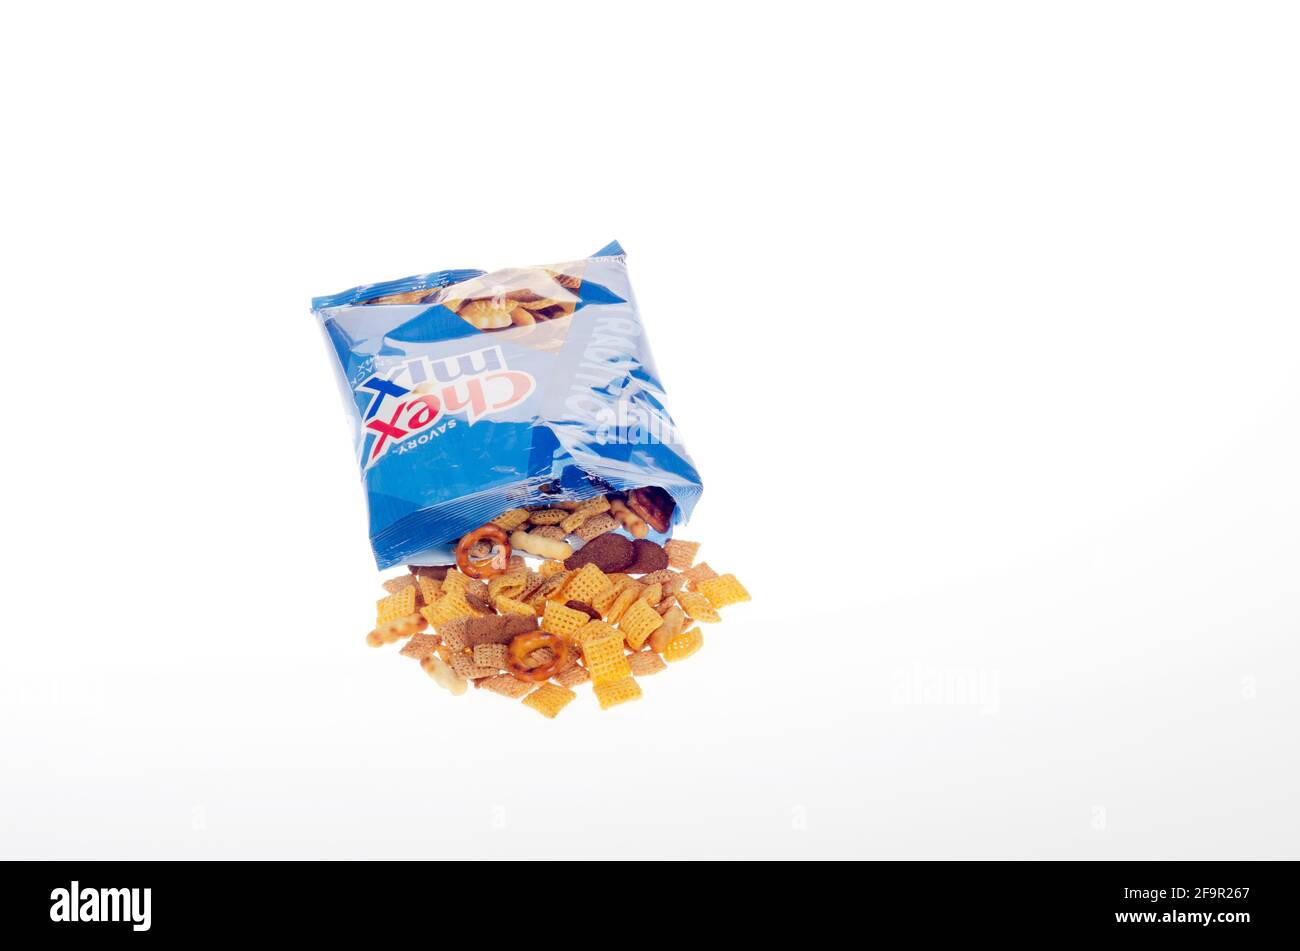 Chex Traditional Snack Mix Opened Bag Stock Photo